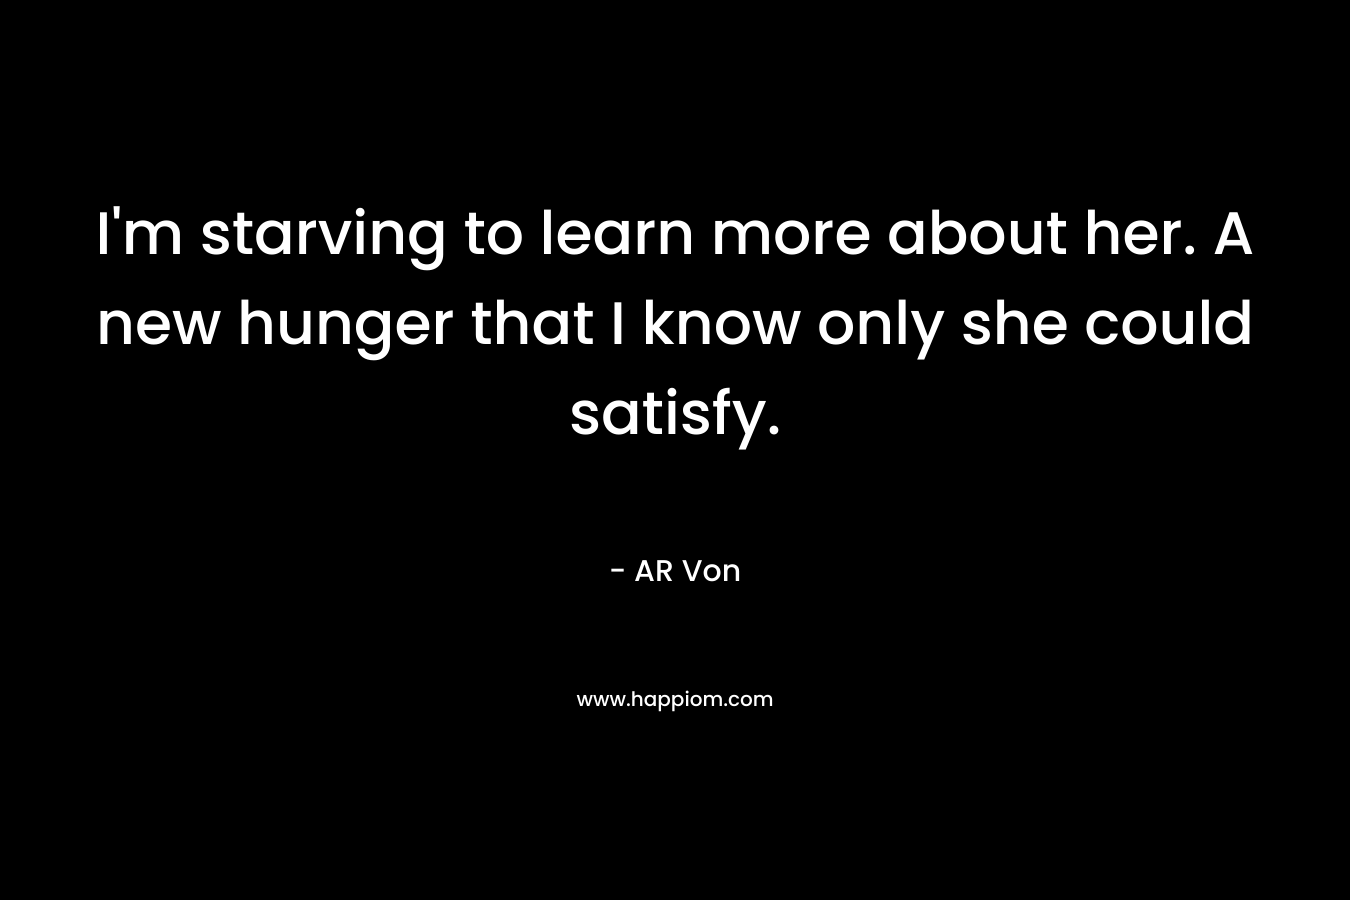 I’m starving to learn more about her. A new hunger that I know only she could satisfy. – AR Von